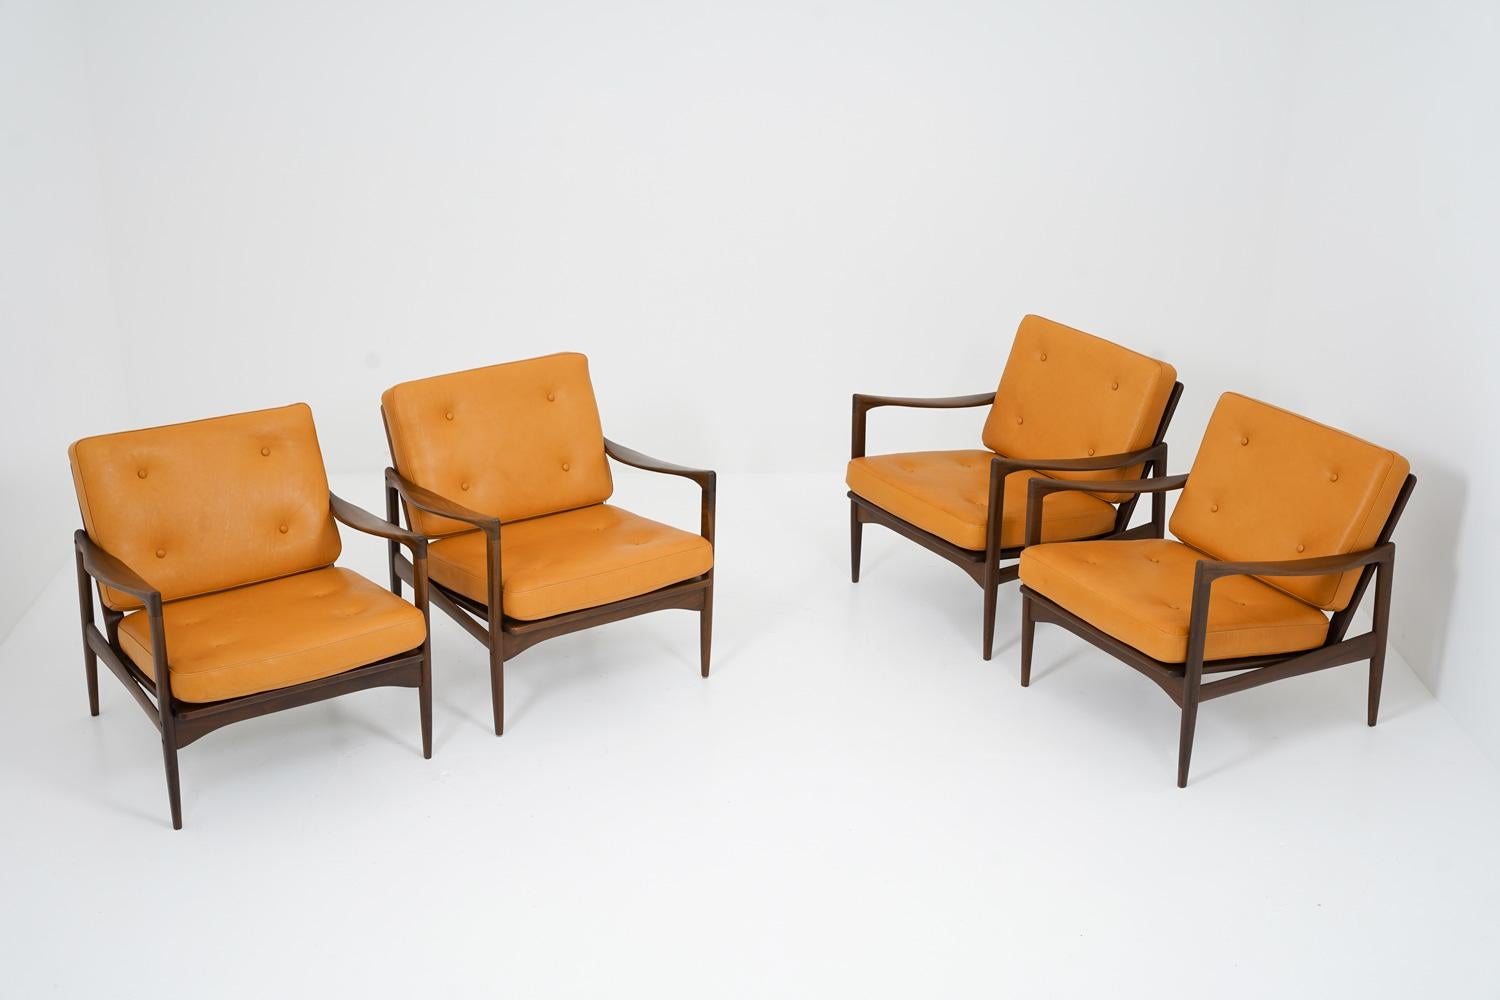 A rare seating group consisting of four lounge chairs, model 